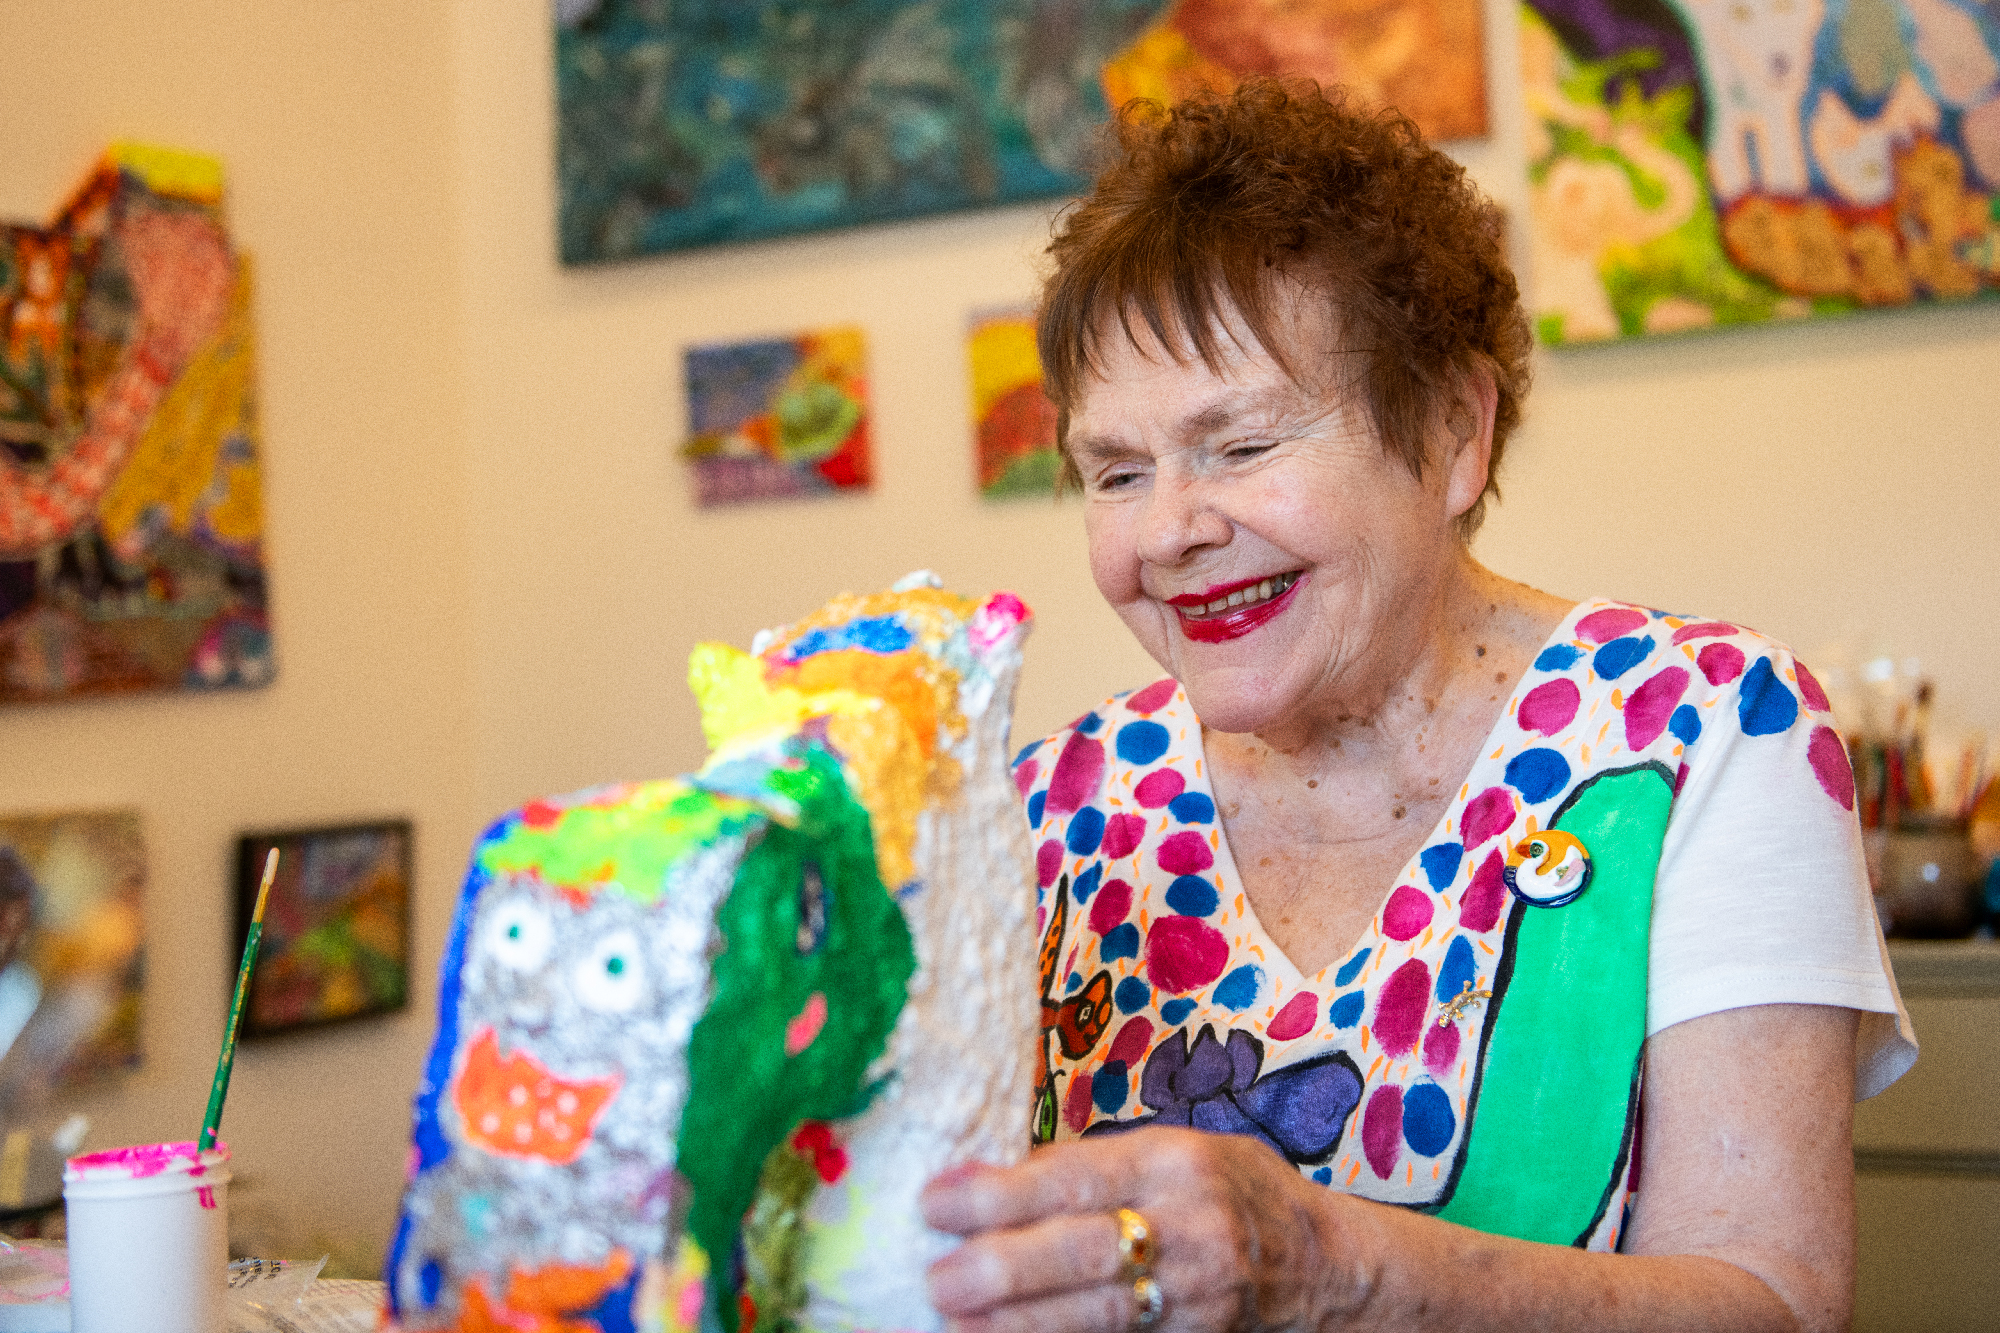 An older woman in a hand-painted shirt looks down at a colorful  sculpture with paintings on the wall behind her.